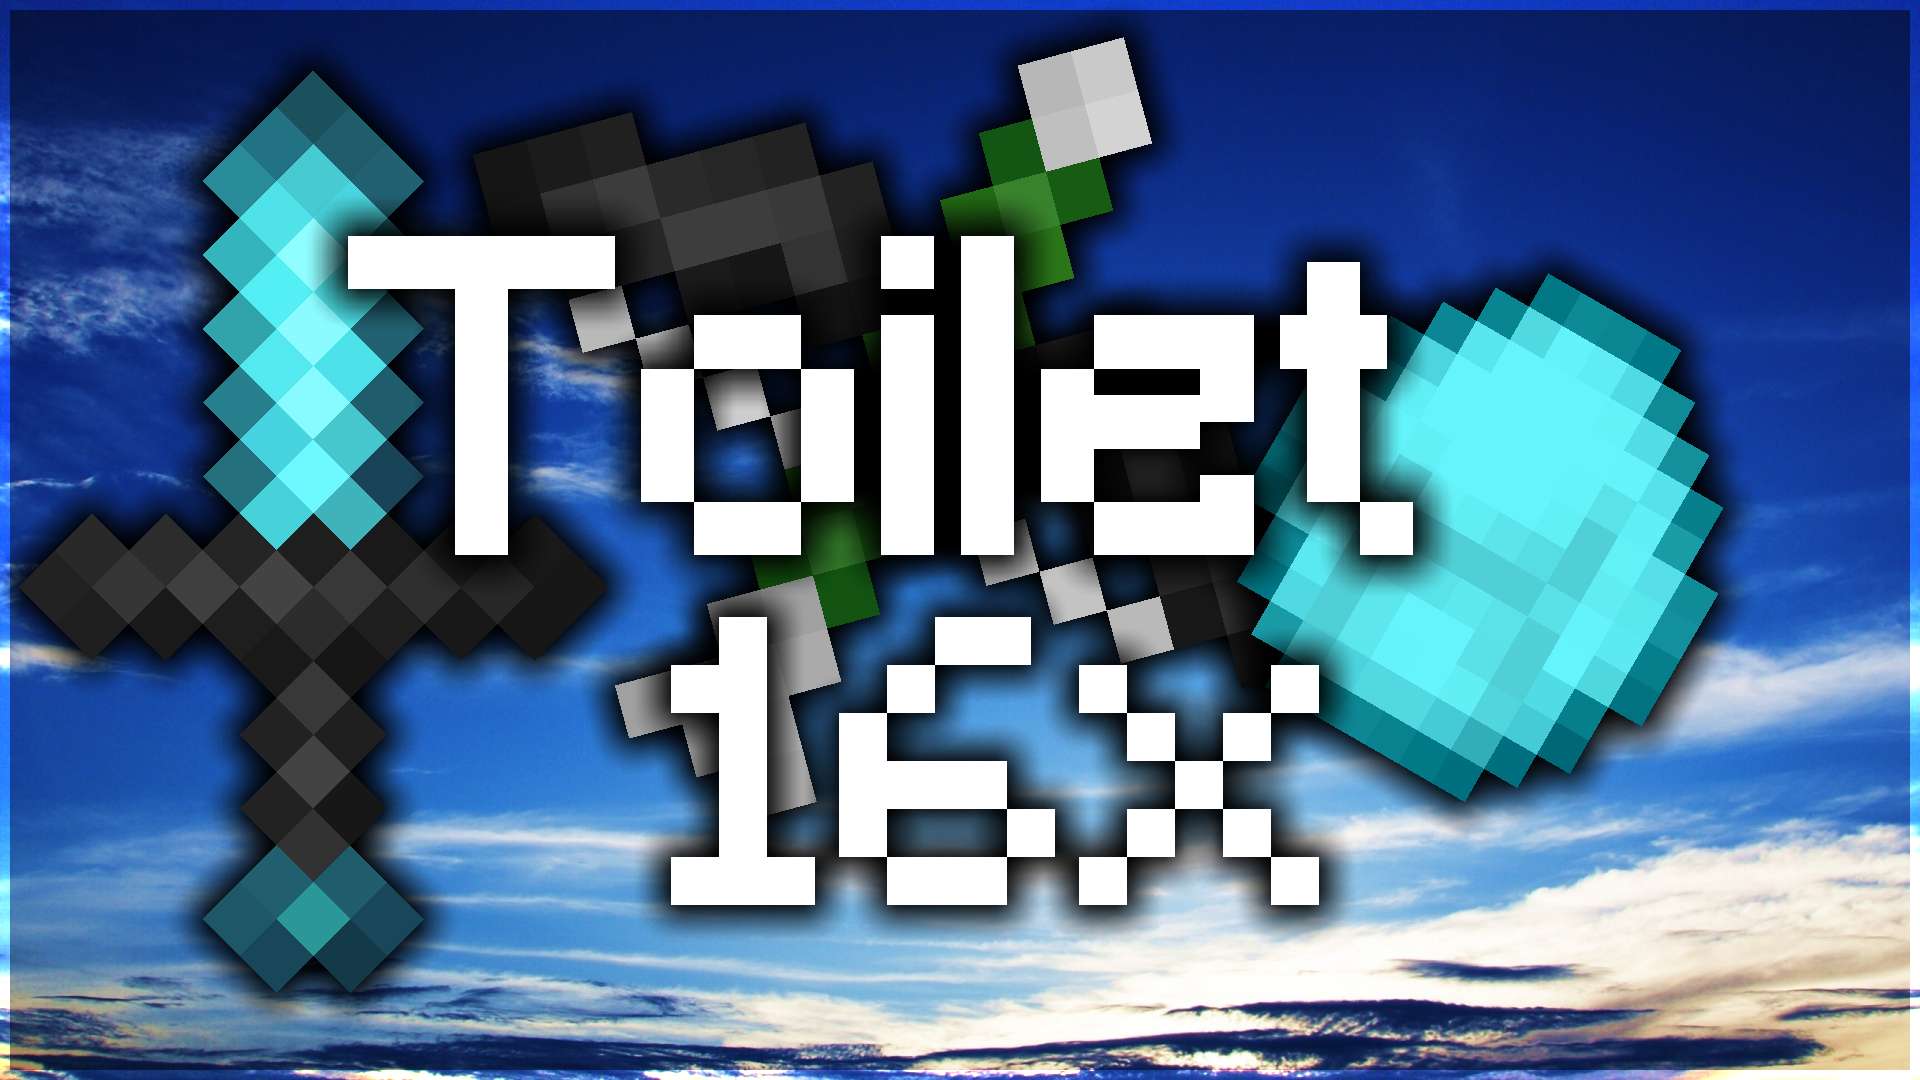 Toilet 16 by toileh on PvPRP